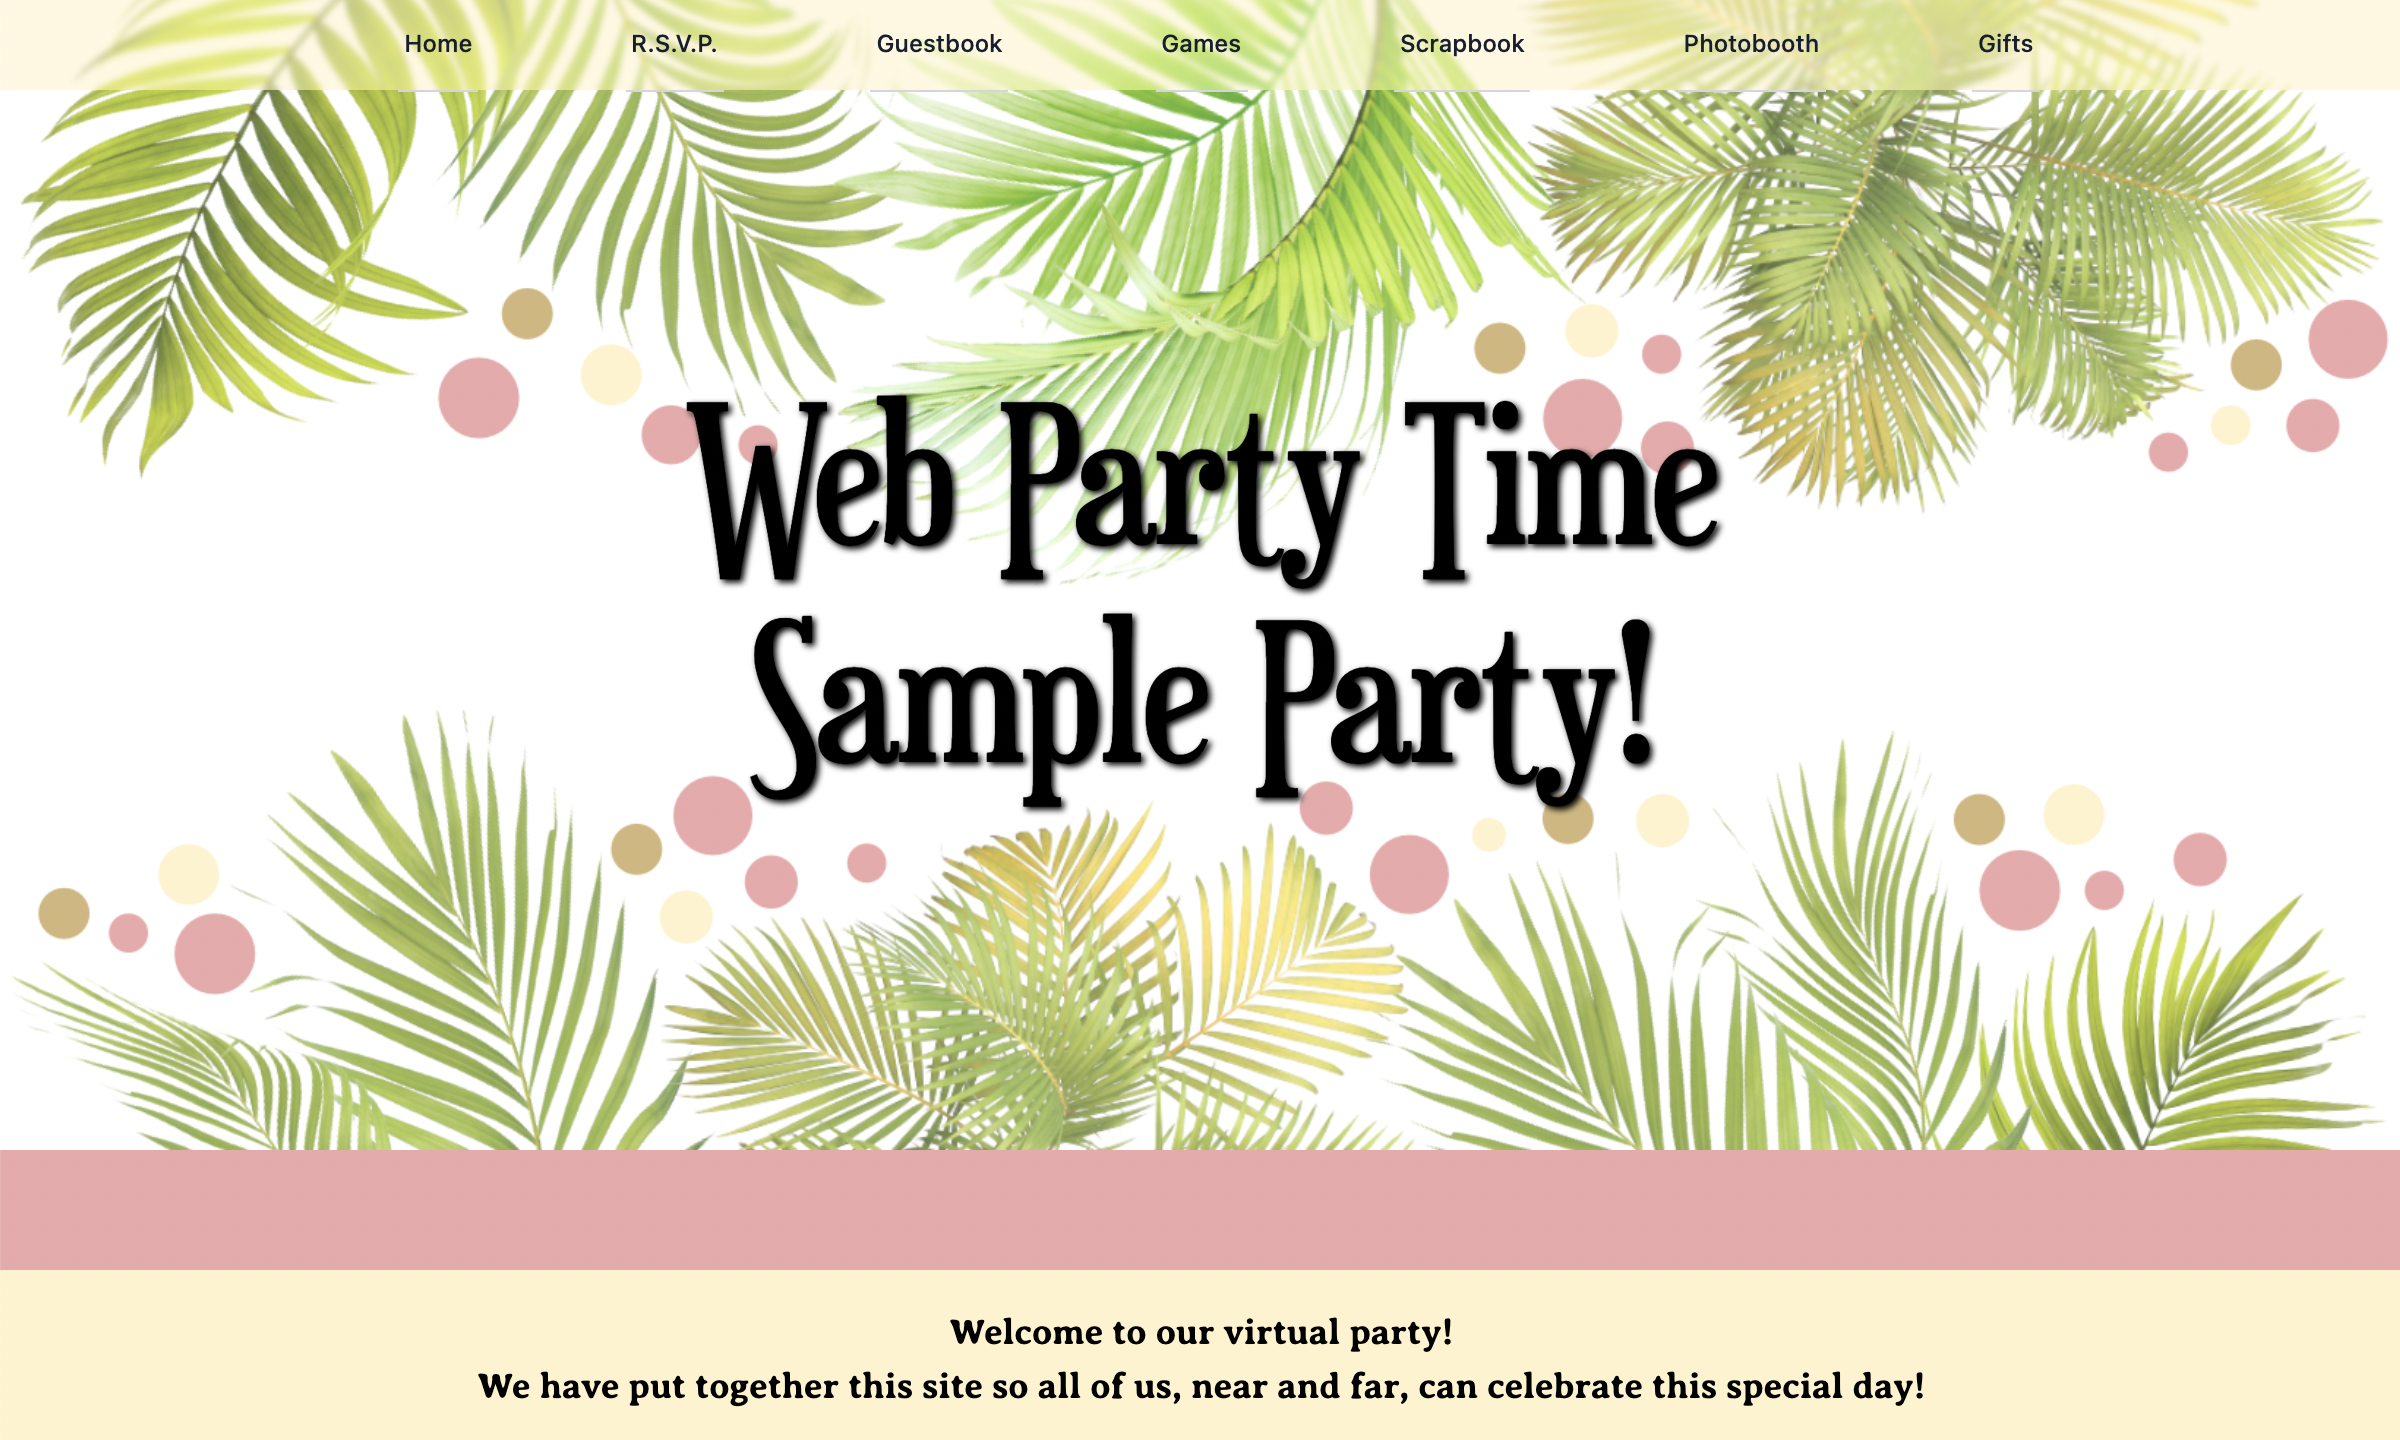 the Pink 'n' Palm theme